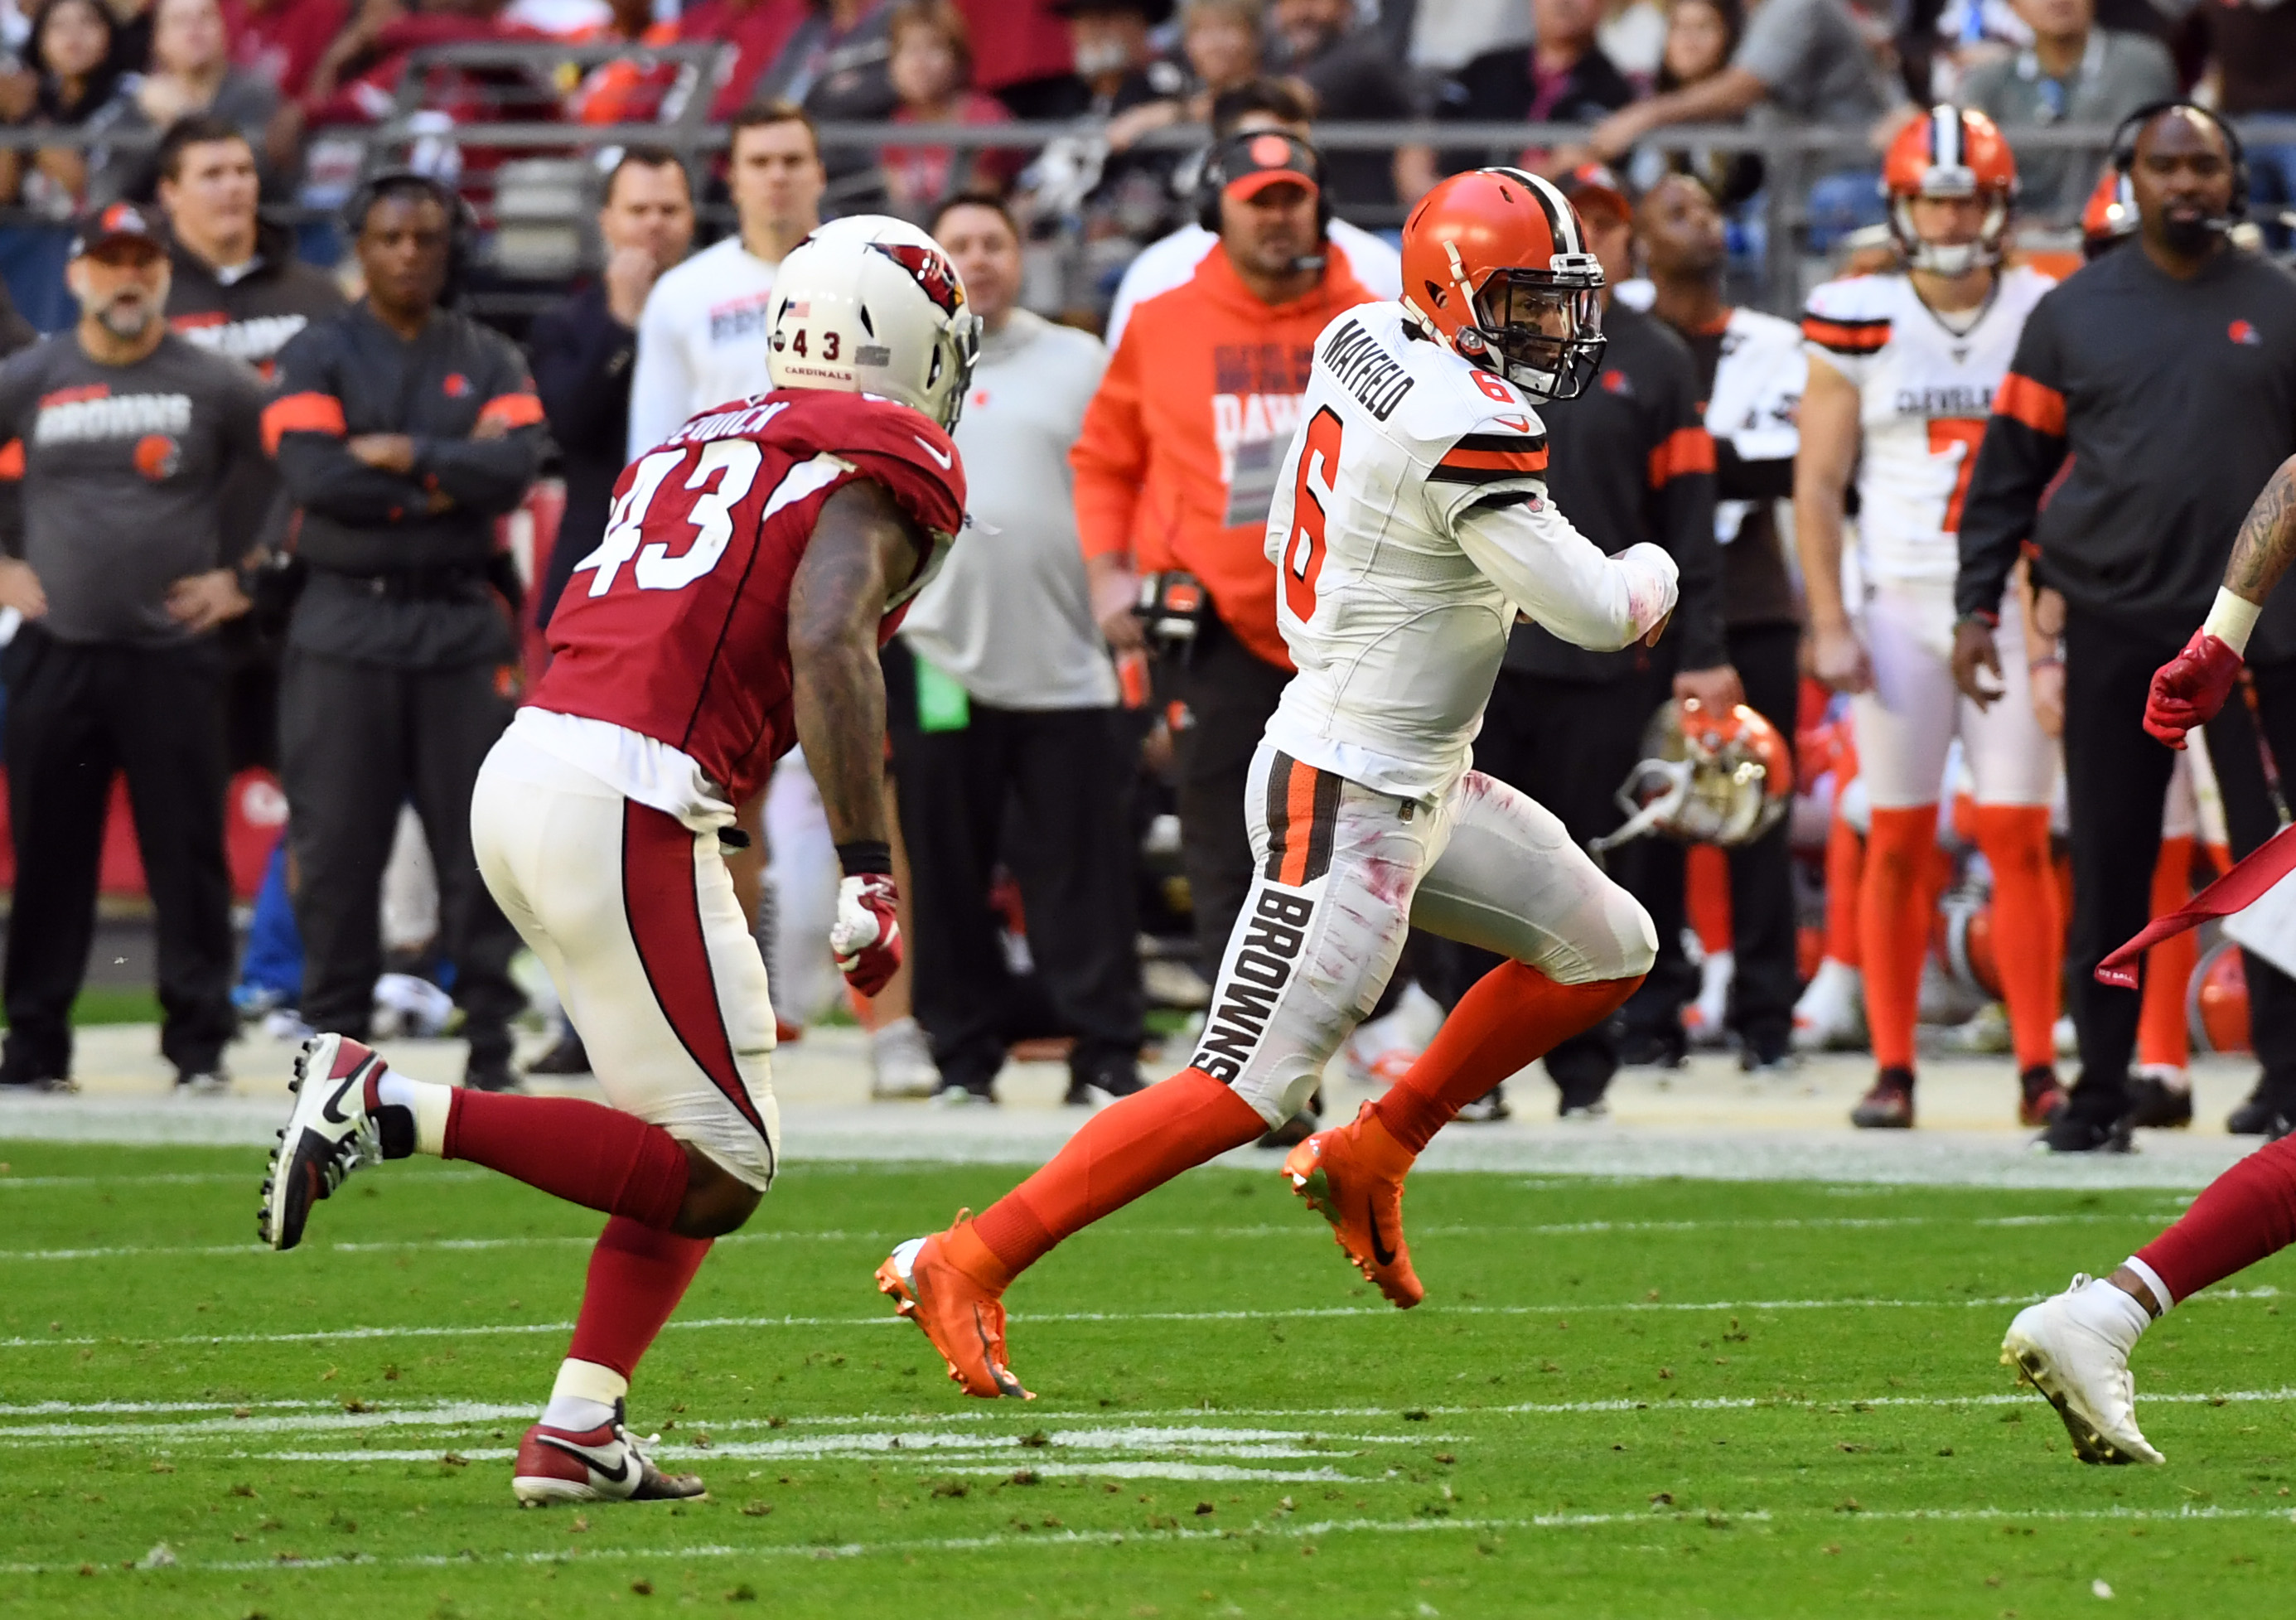 Cardinals vs. Browns final score: What we learned in 38-24 win